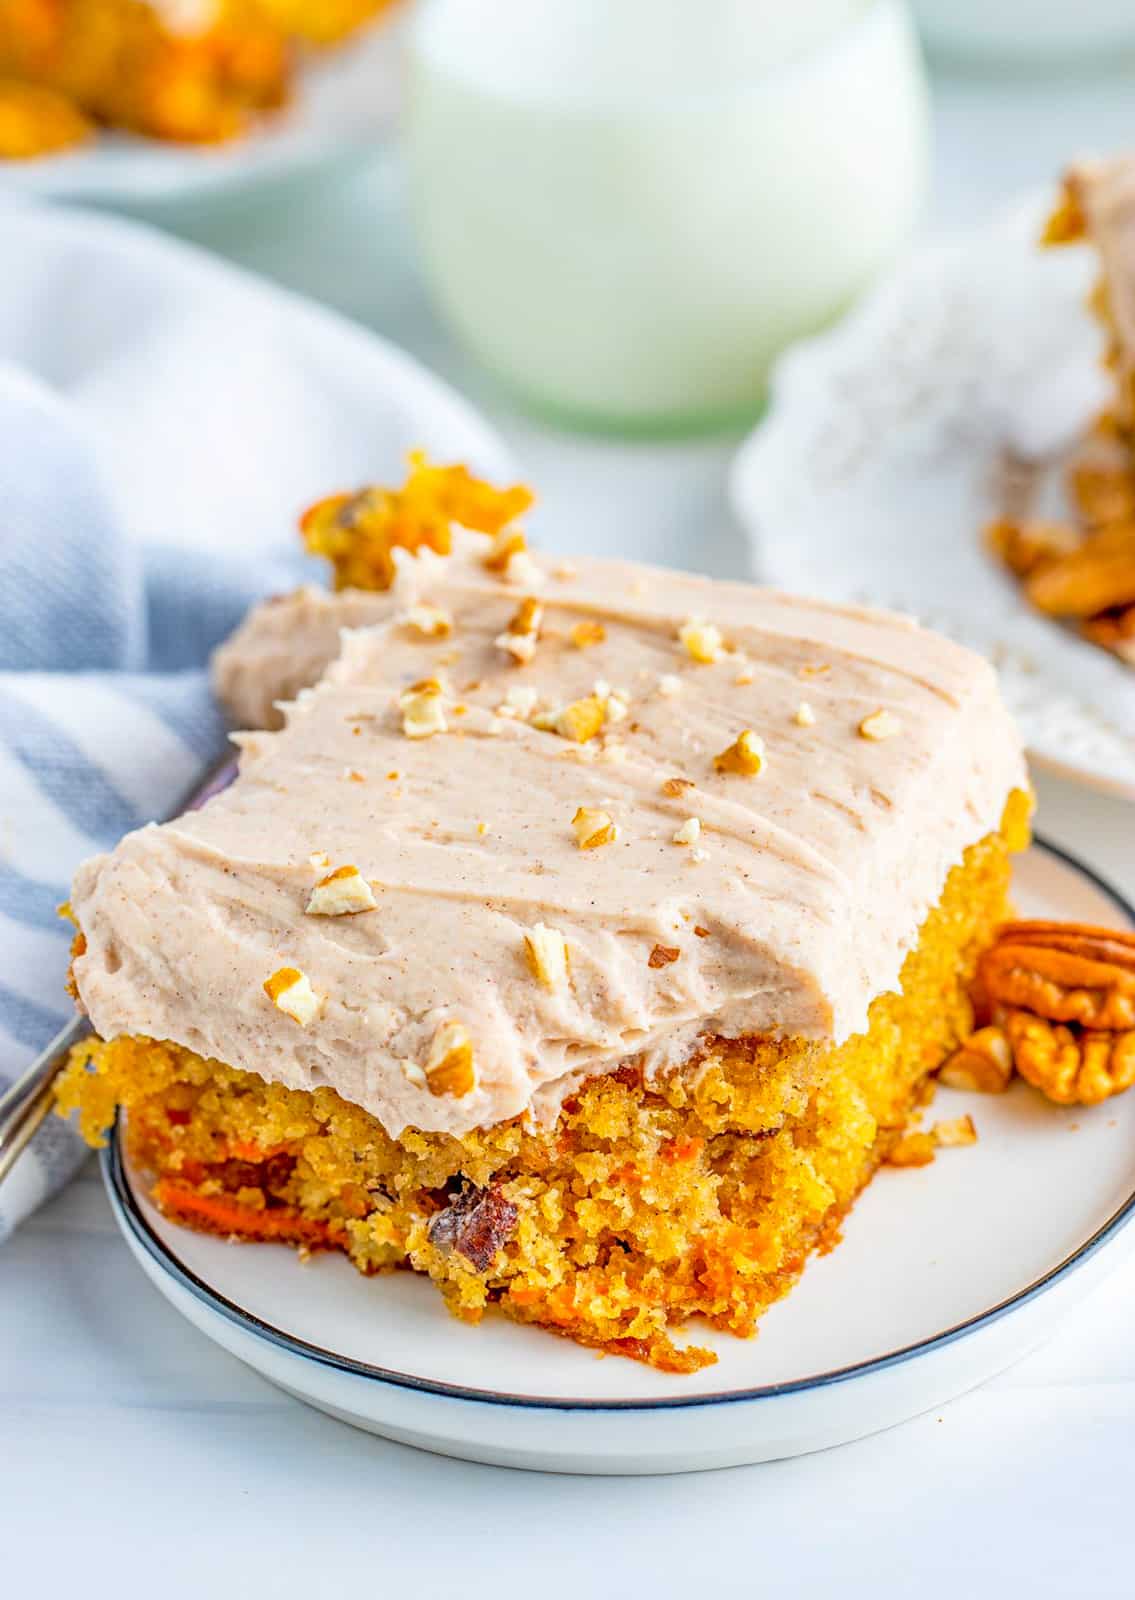 Close up of a slice of The Best Carrot Cake with bite taken out